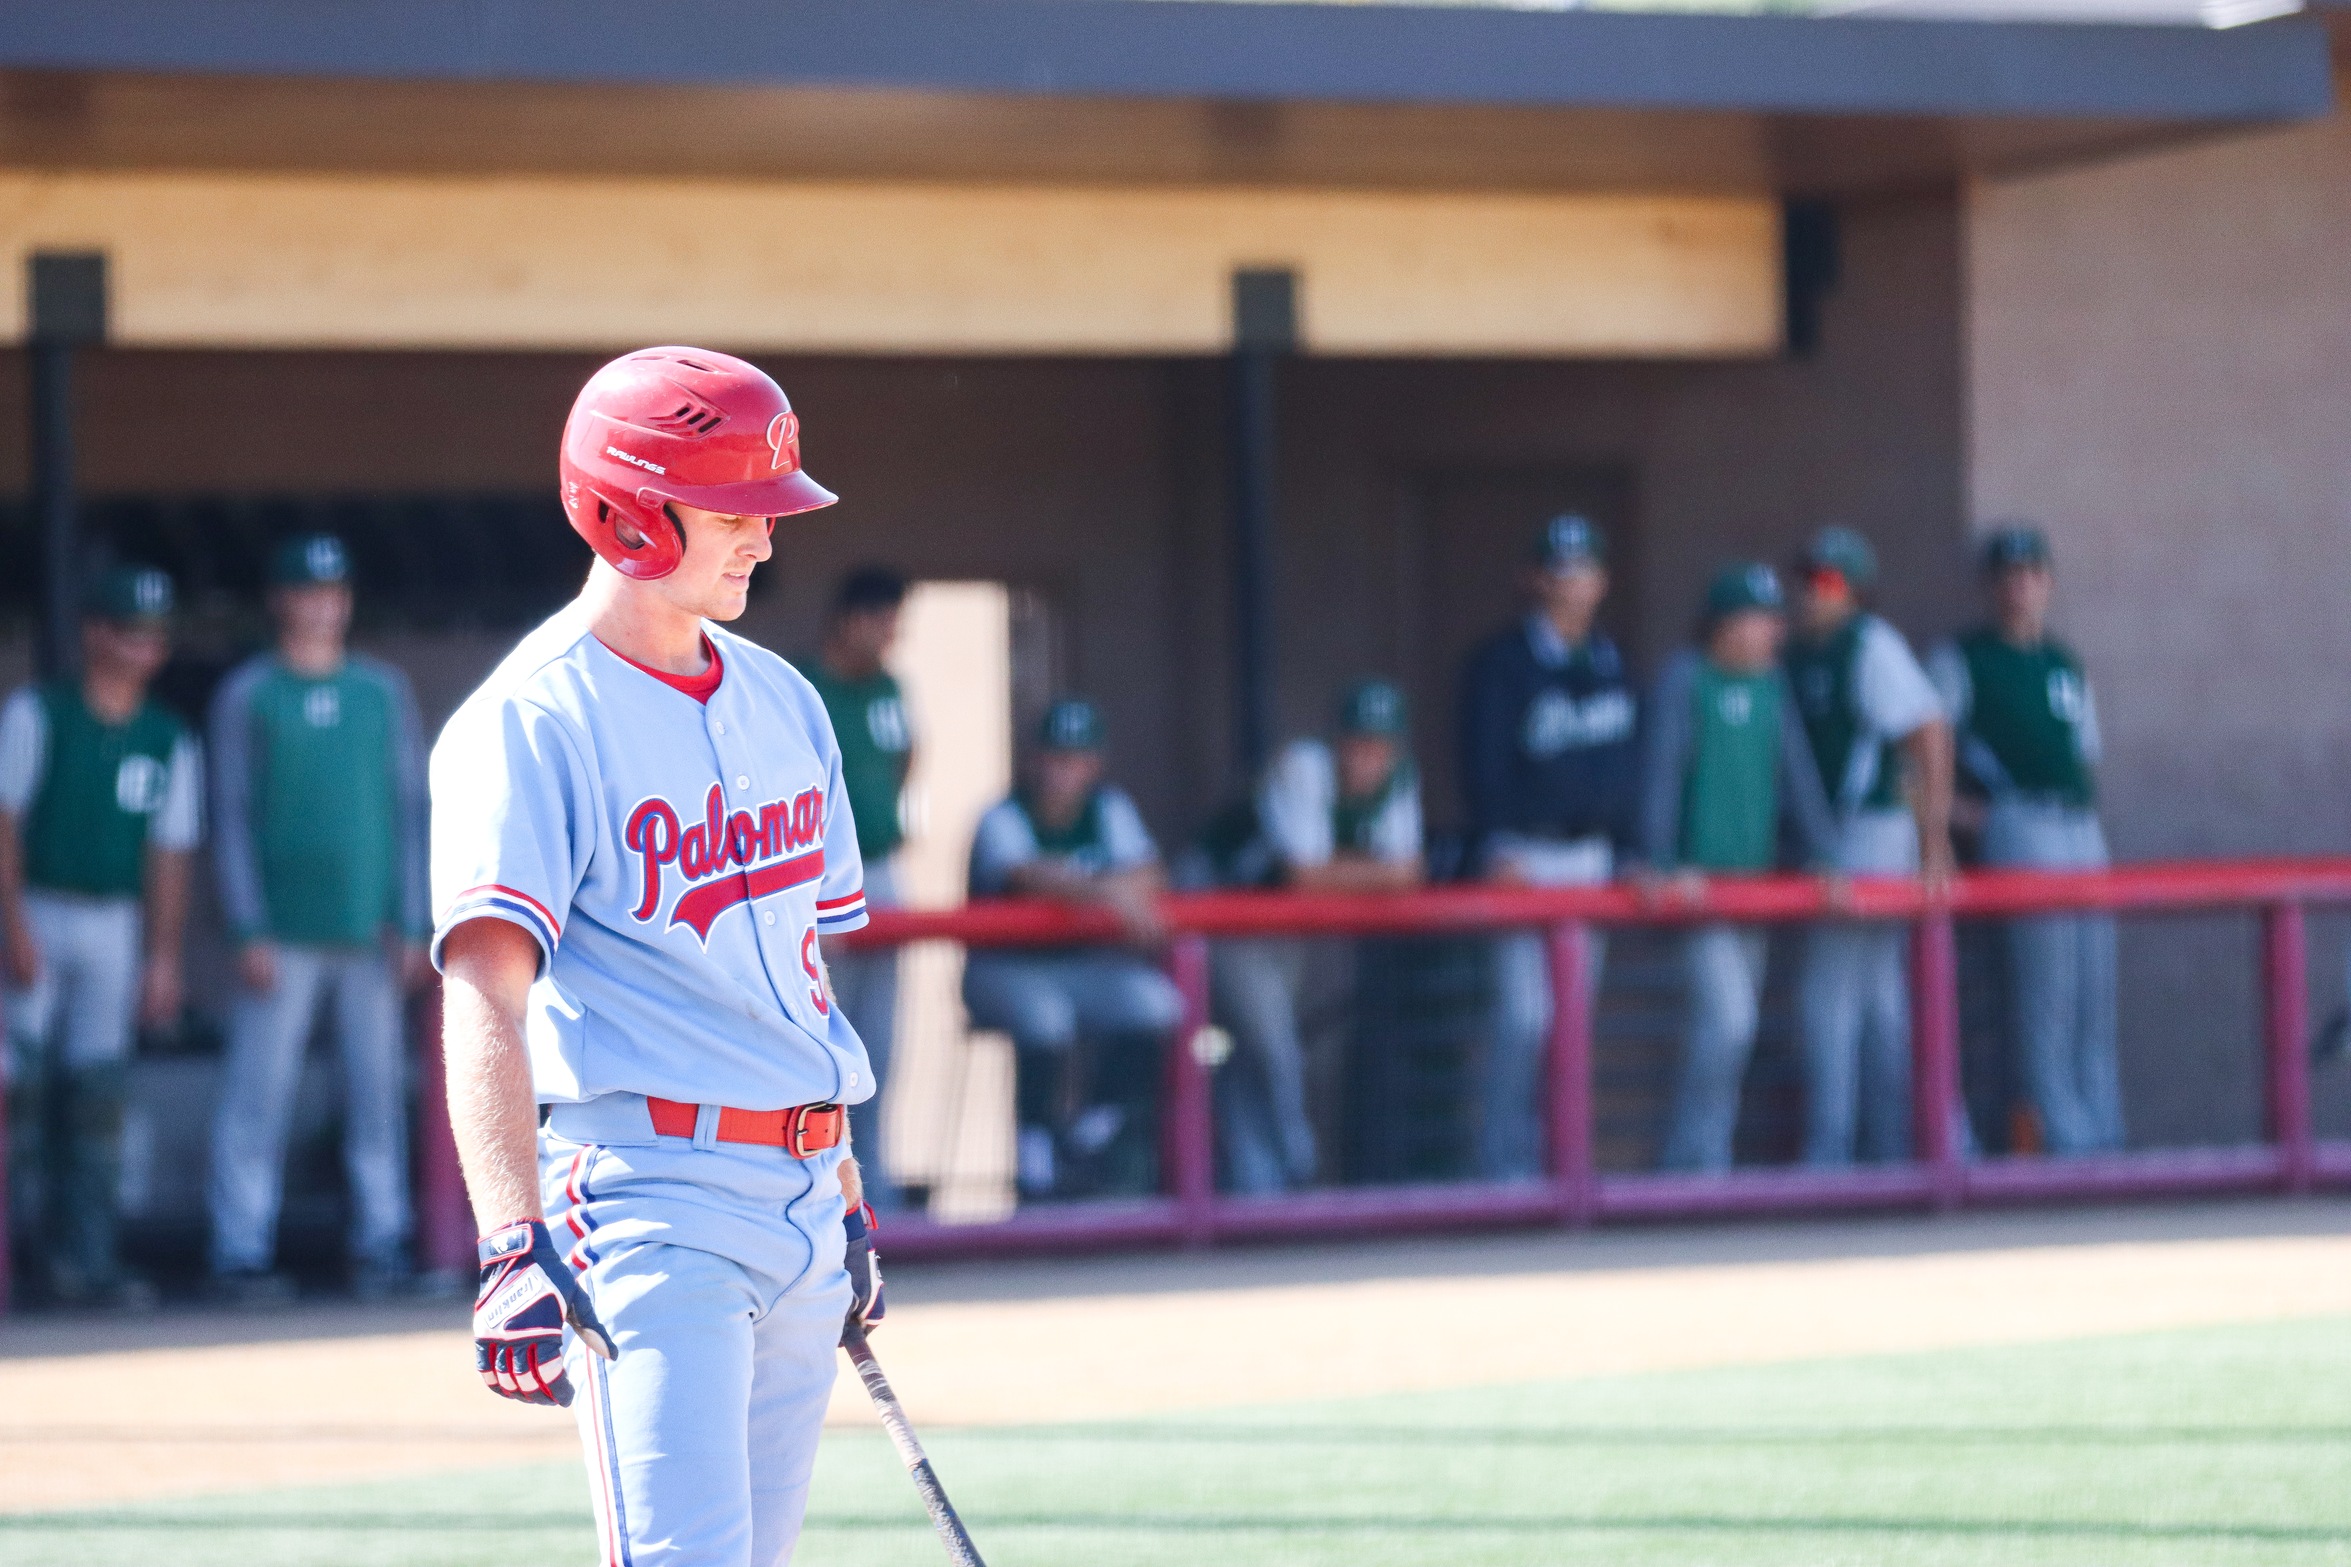 Noah Lazuka was one of two Comets named an ABCA/Rawlings All-American. Photo by Cara Heise.